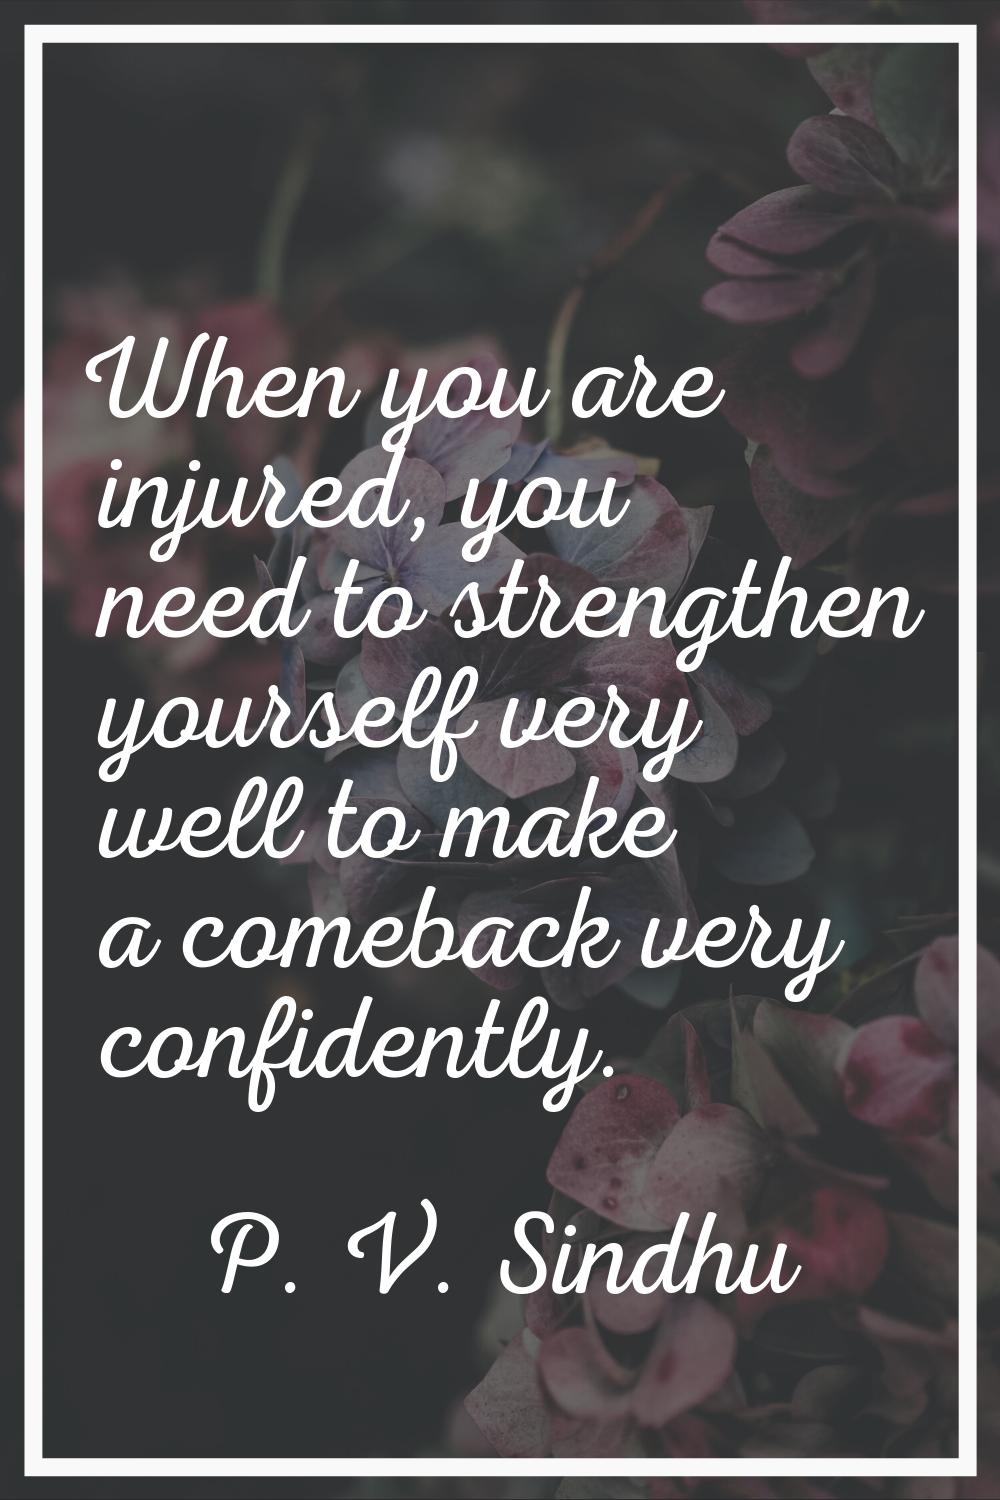 When you are injured, you need to strengthen yourself very well to make a comeback very confidently